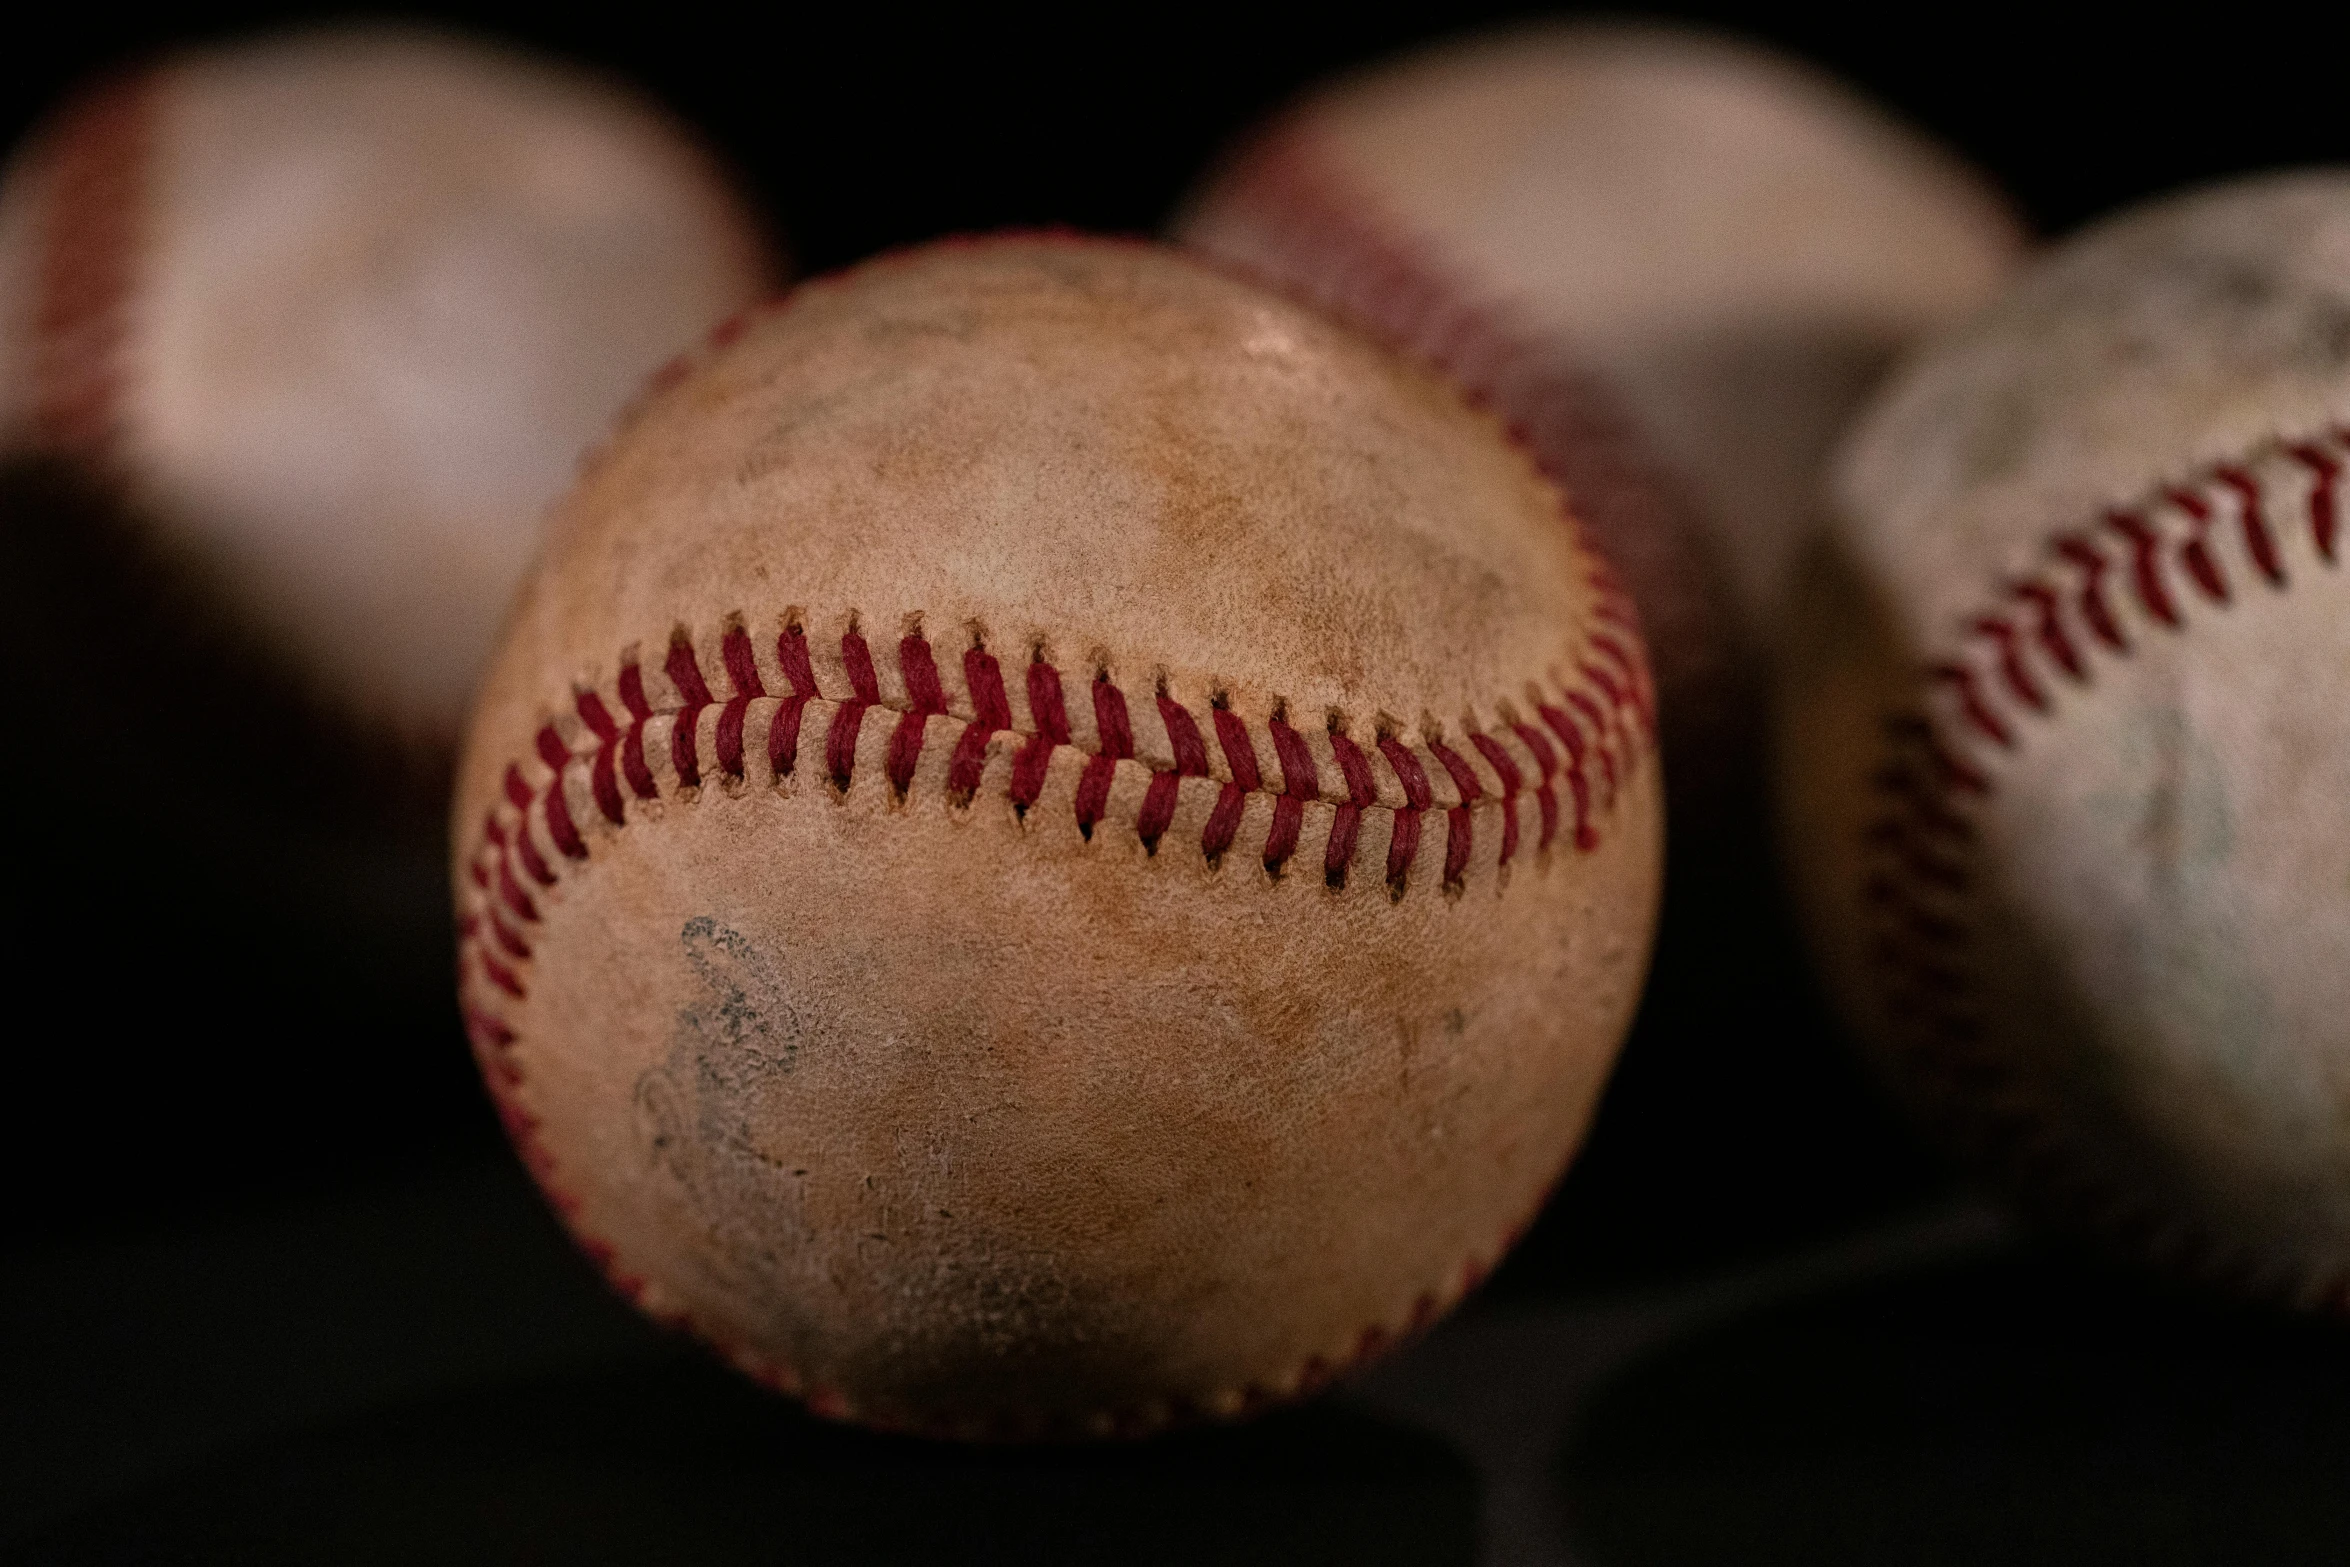 three baseballs and balls are sitting on the table